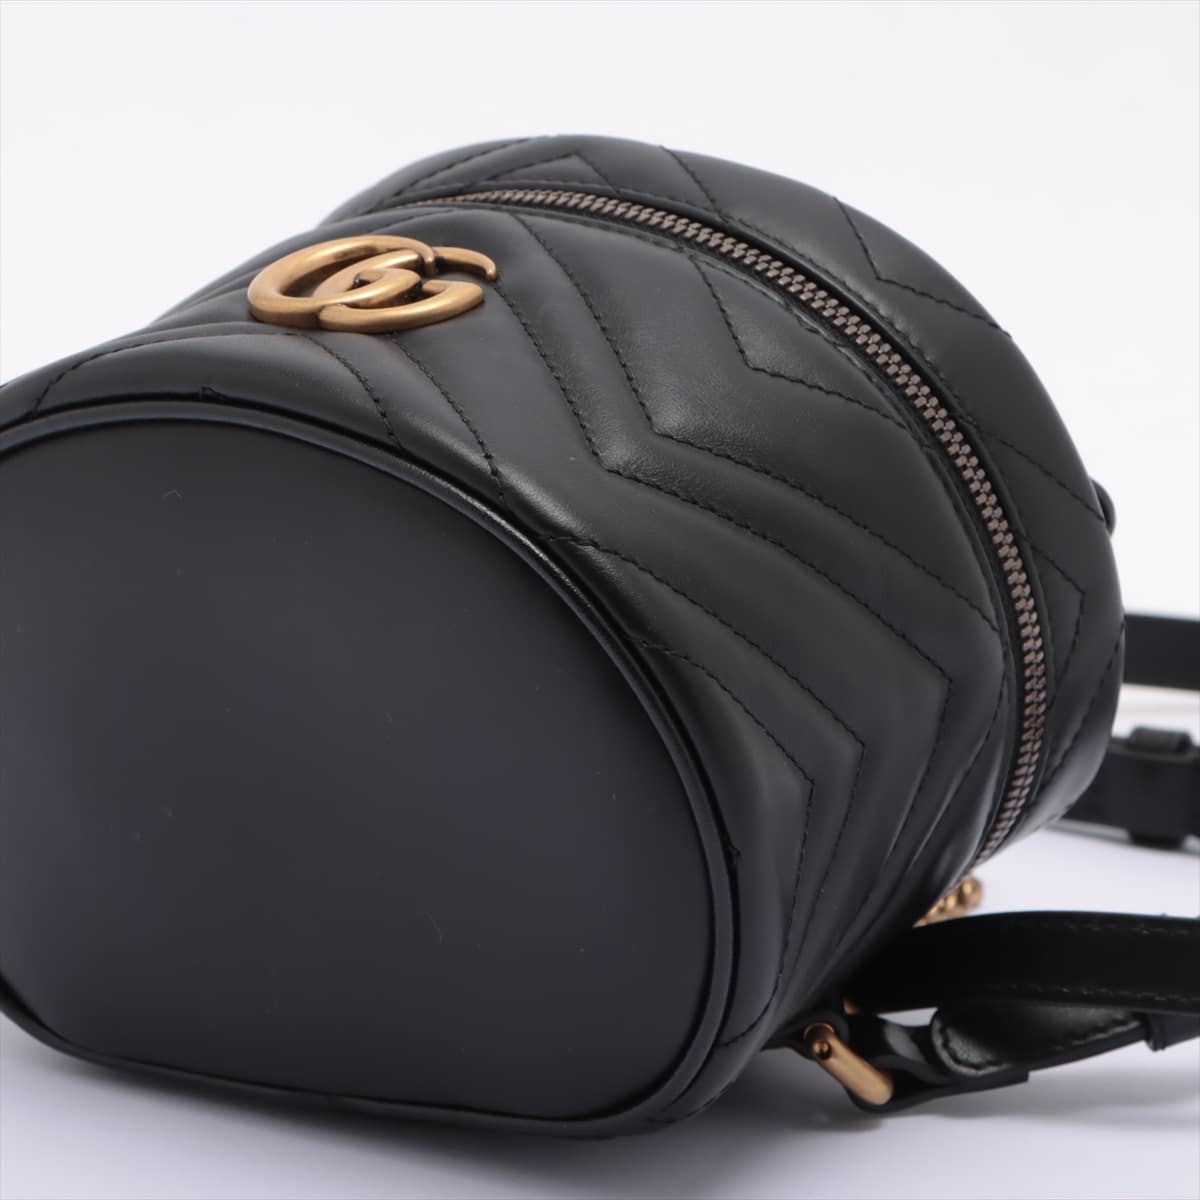 Gucci GG Marmont Leather Backpack Black 598594